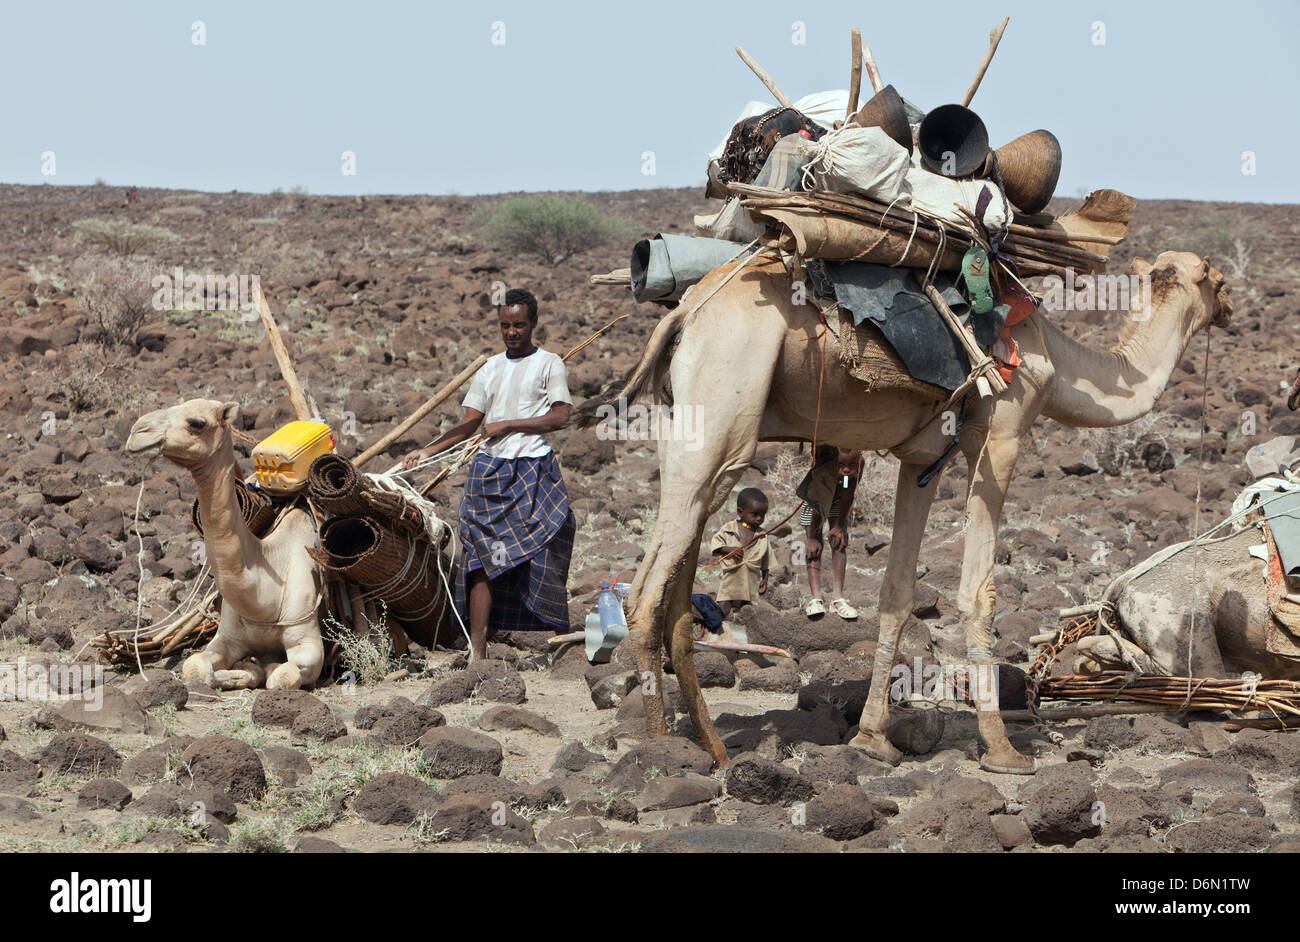 Semara, Ethiopia, nomadic family camped in the vicinity of a water body Stock Photo